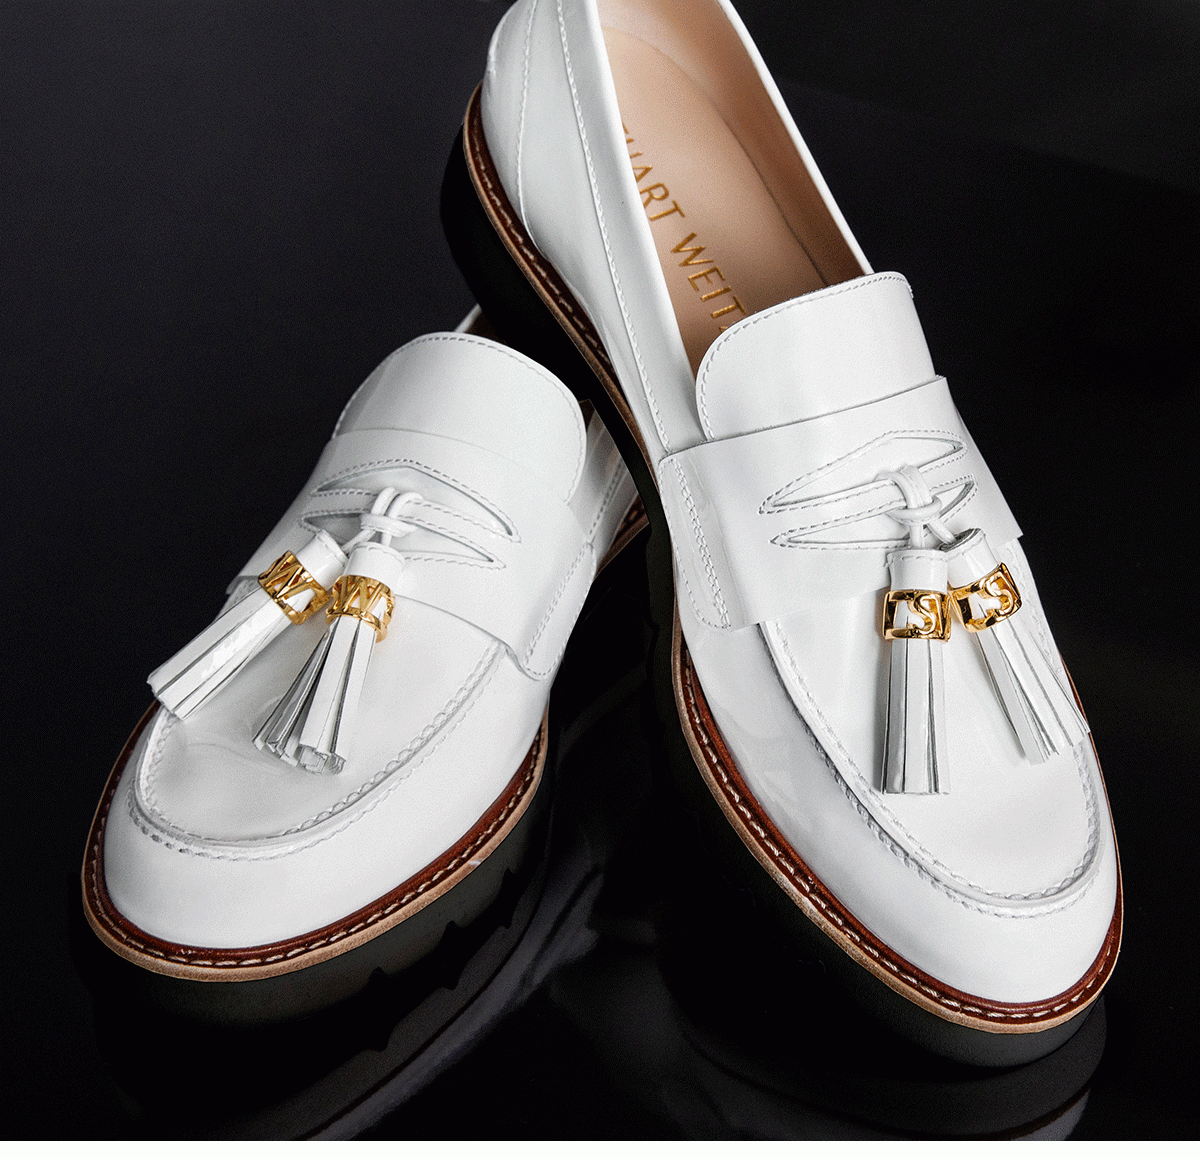 Behold: The MANILA Is Back. We brought back our best-selling loafer silhouette due to popular demand — and gave it an updated SIGNATURE look. SHOP BEST SELLERS